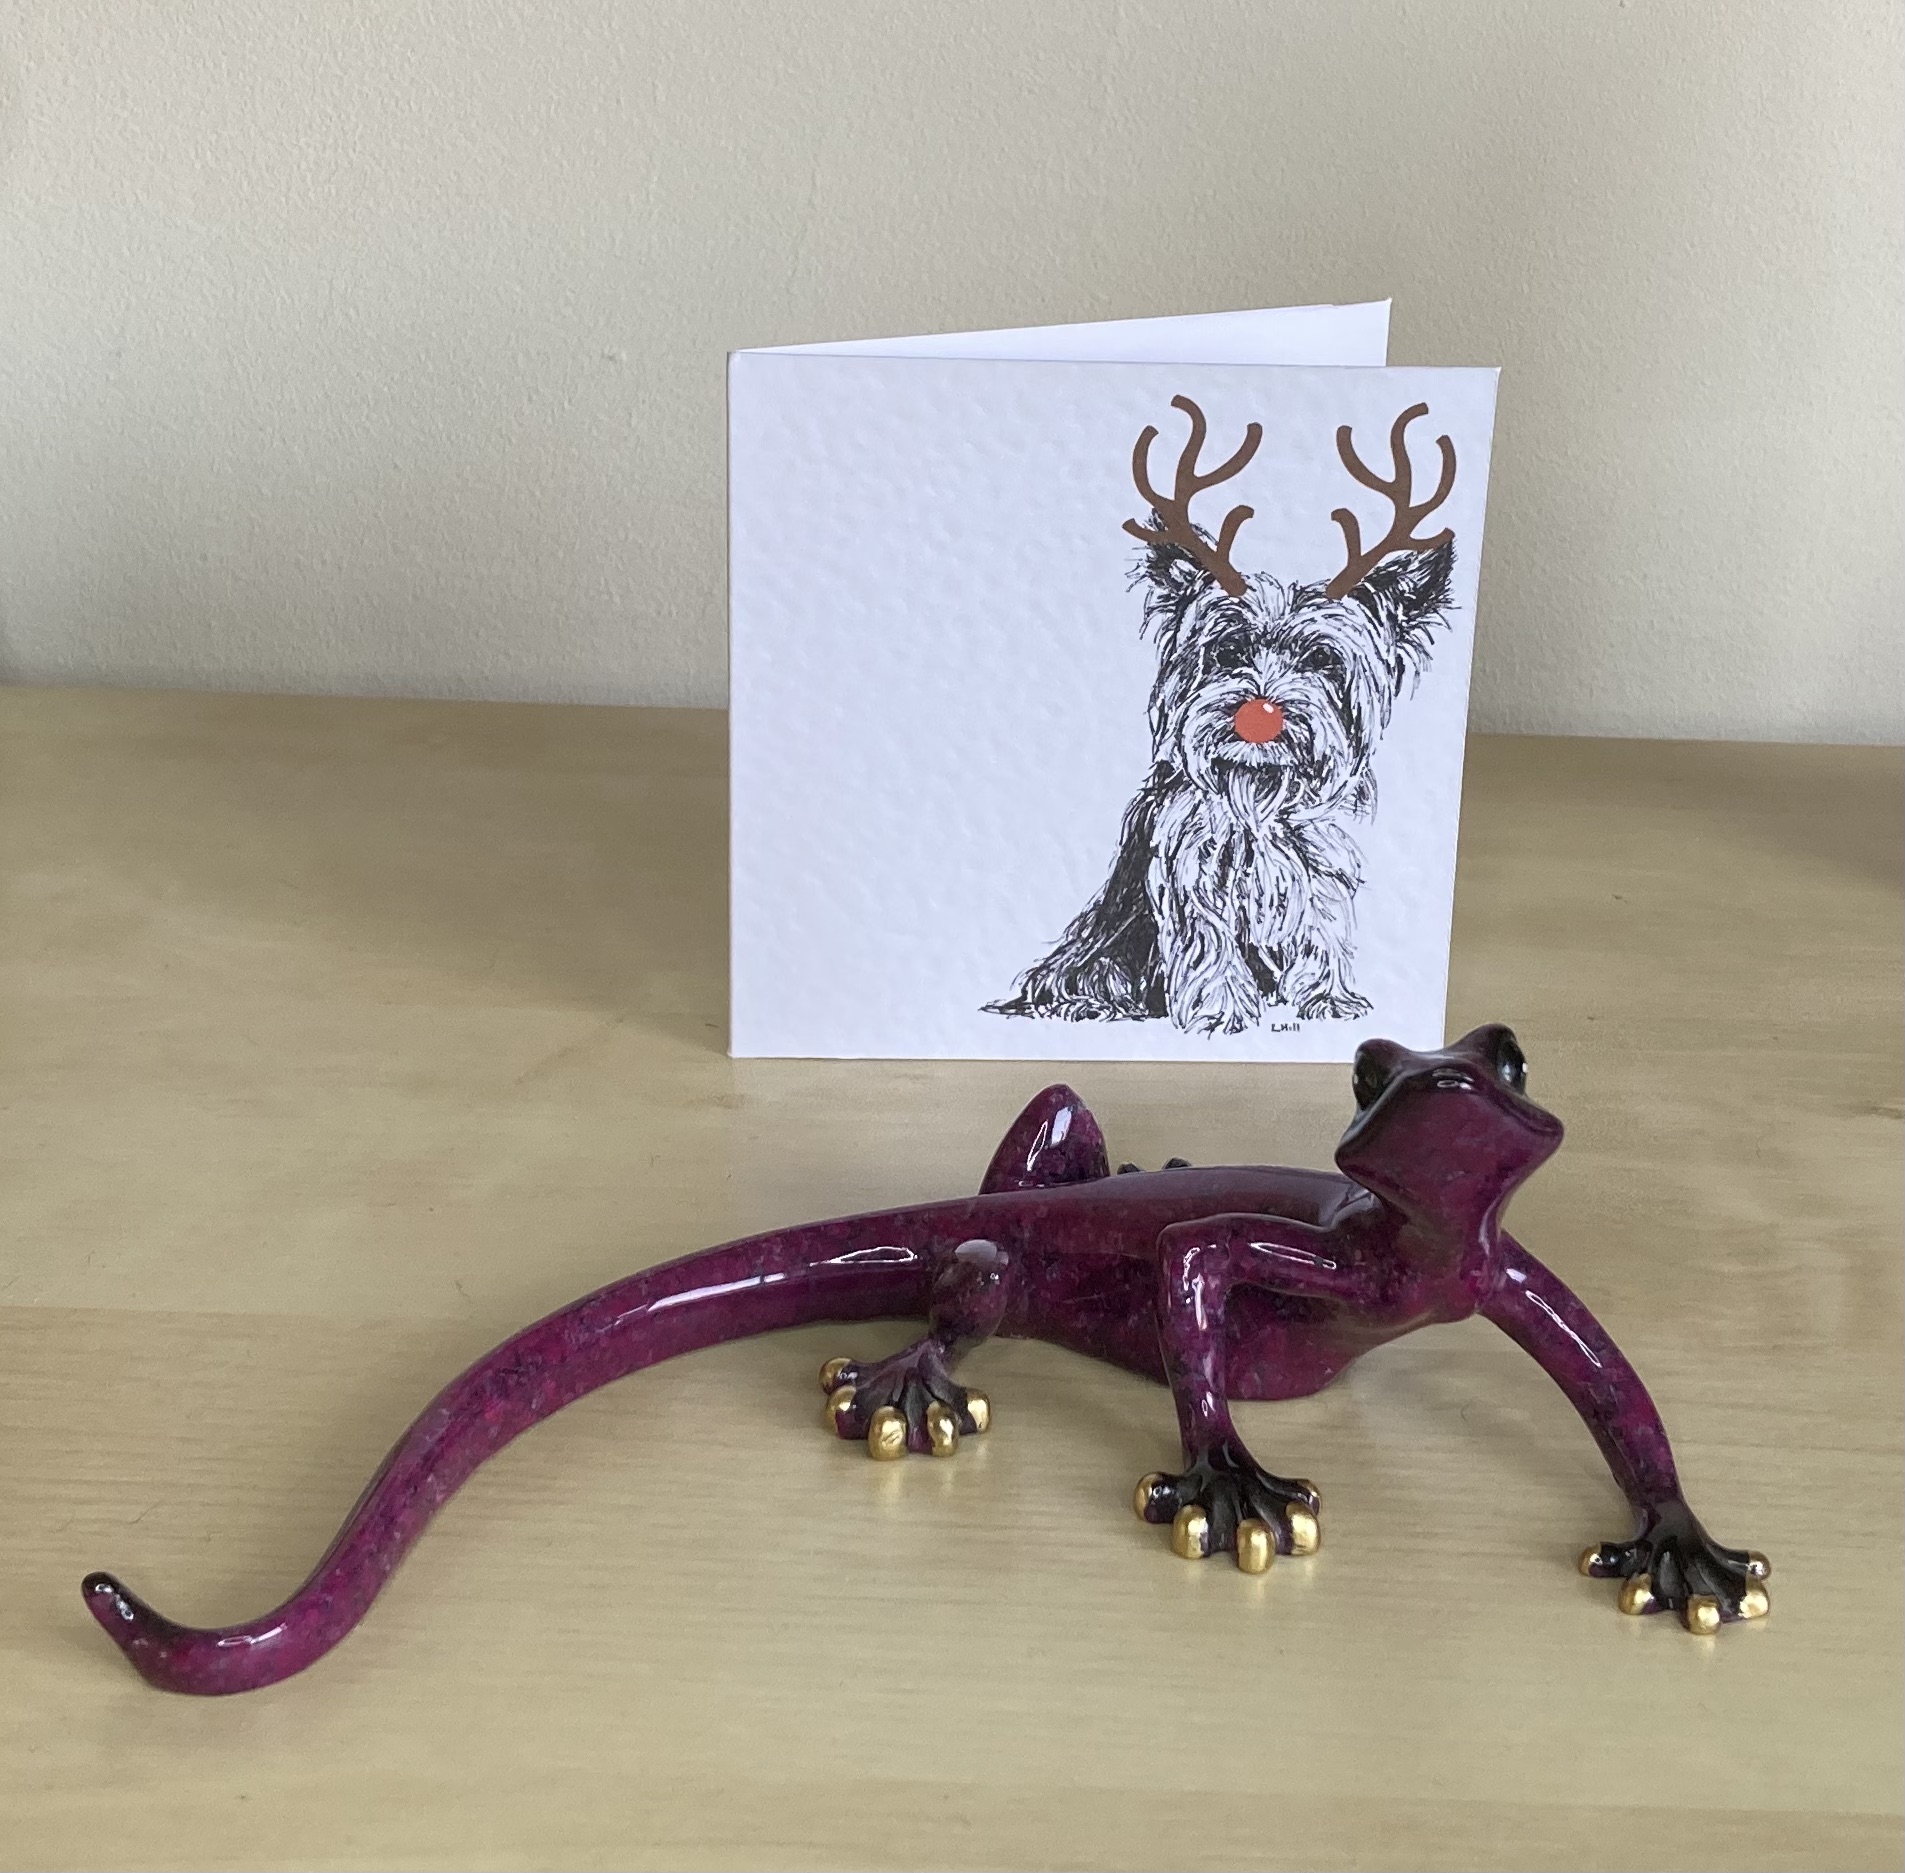 Yorkshire Terrier with reindeer antlers and red nose Christmas card by Louisa Hill